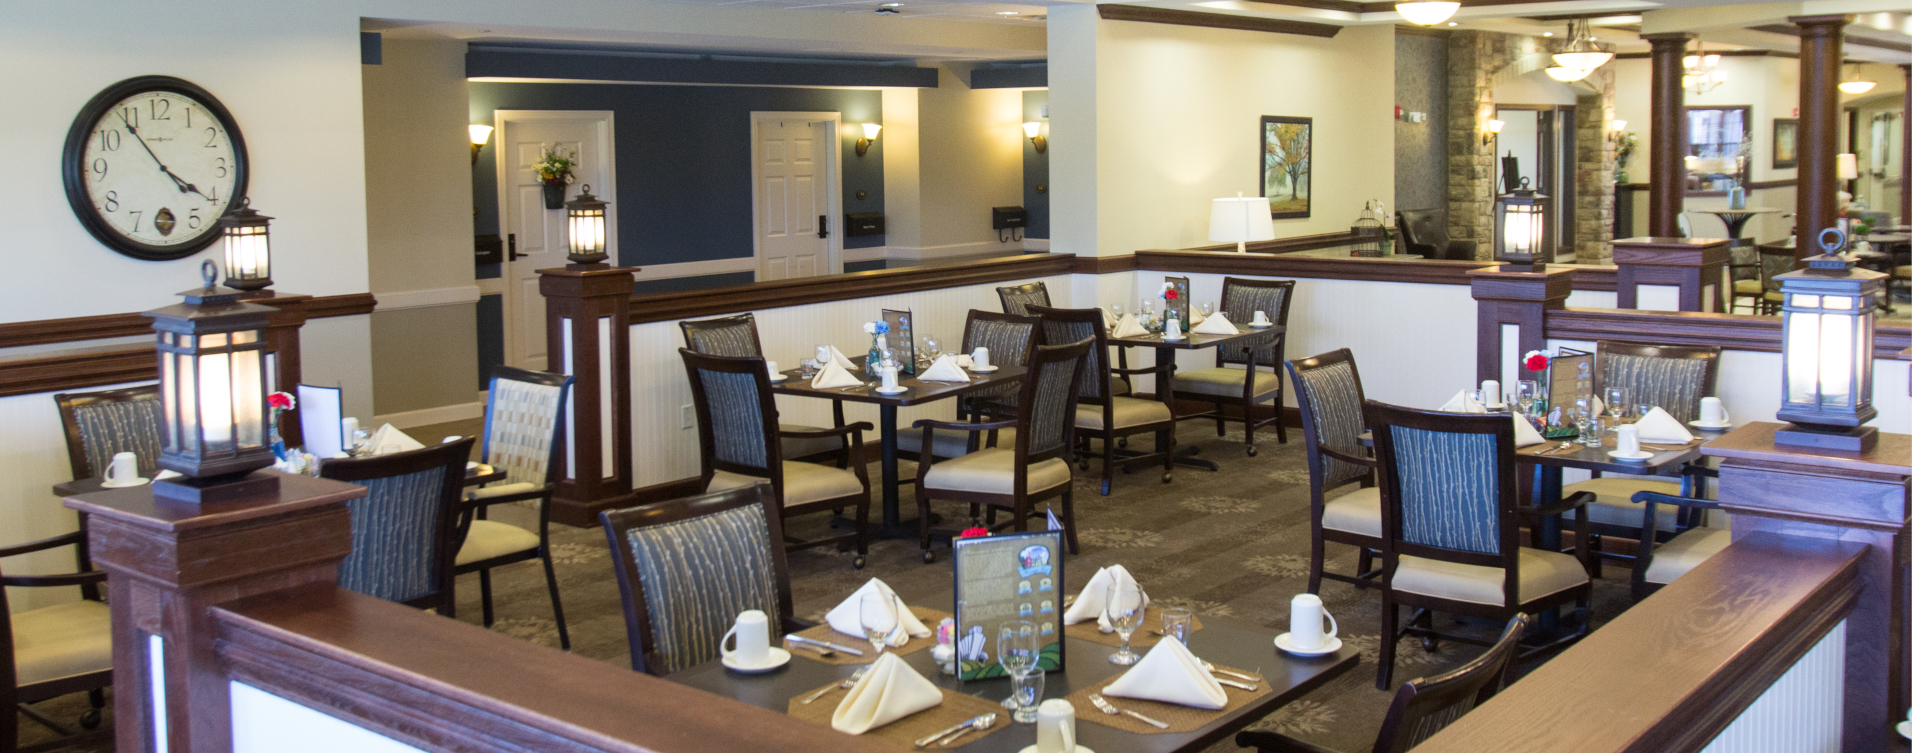 Enjoy restaurant -style meals served three times a day in our dining room at Bickford of Tinley Park